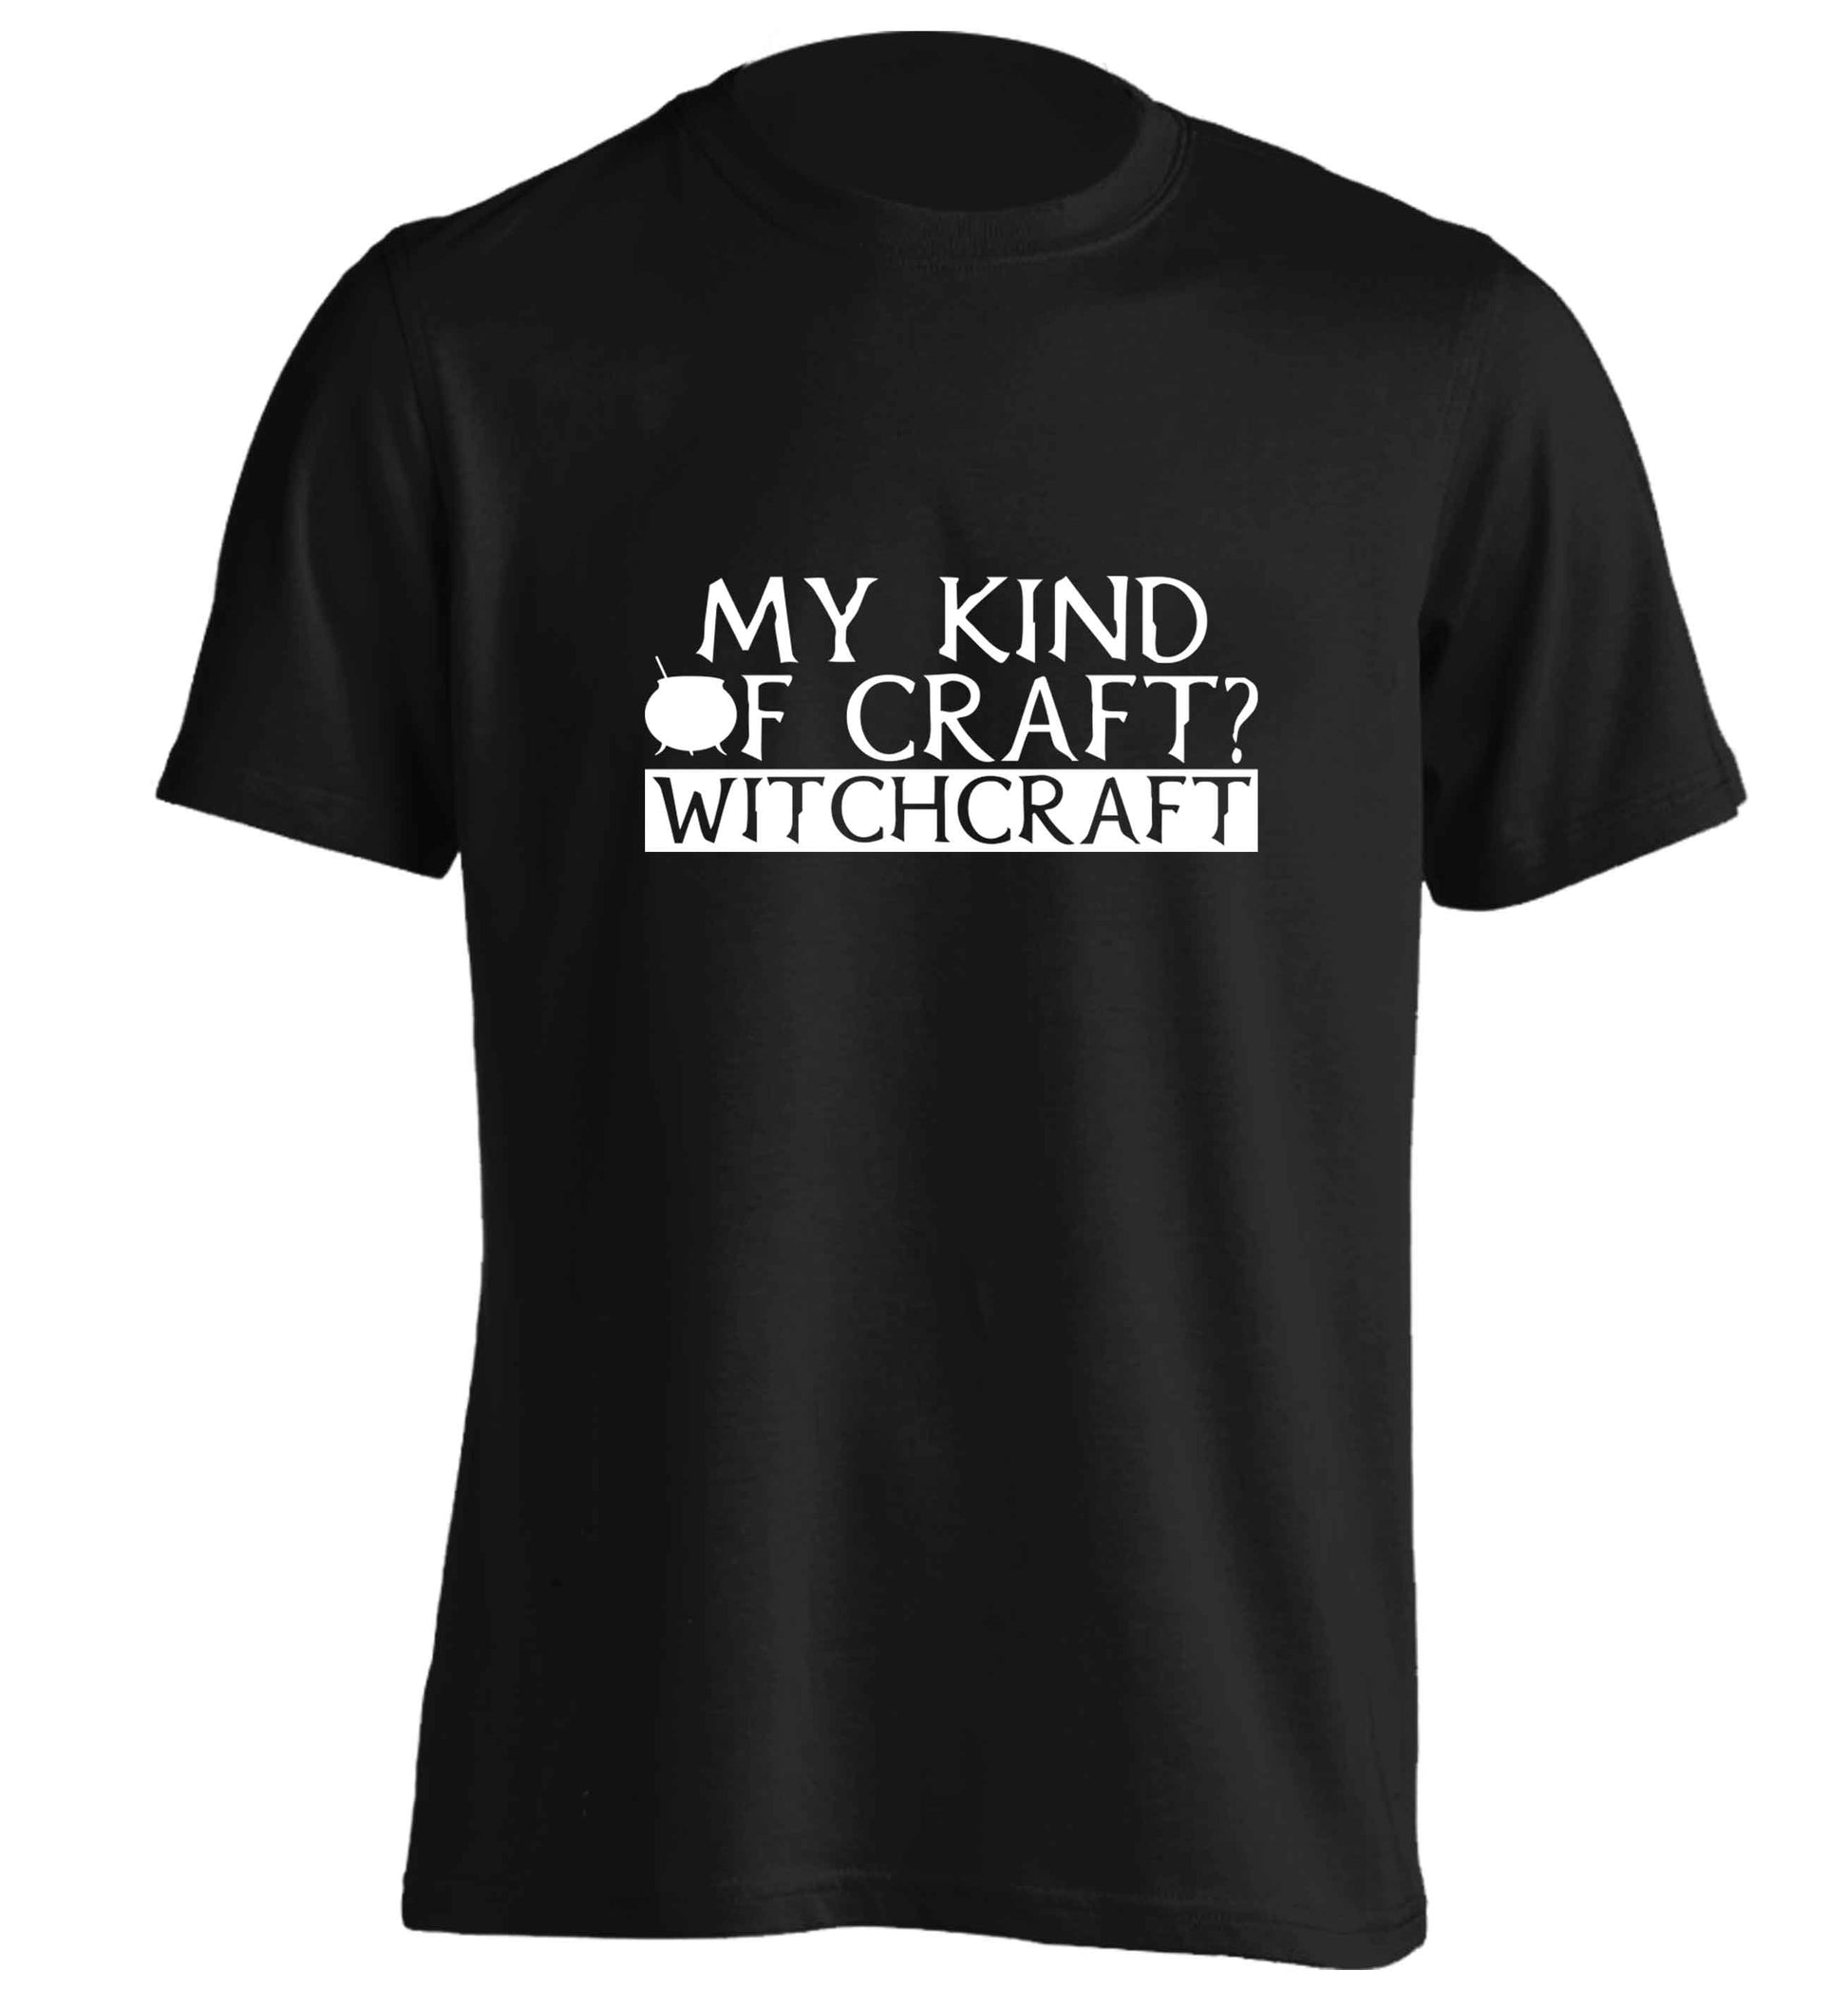 My king of craft? witchcraft  adults unisex black Tshirt 2XL